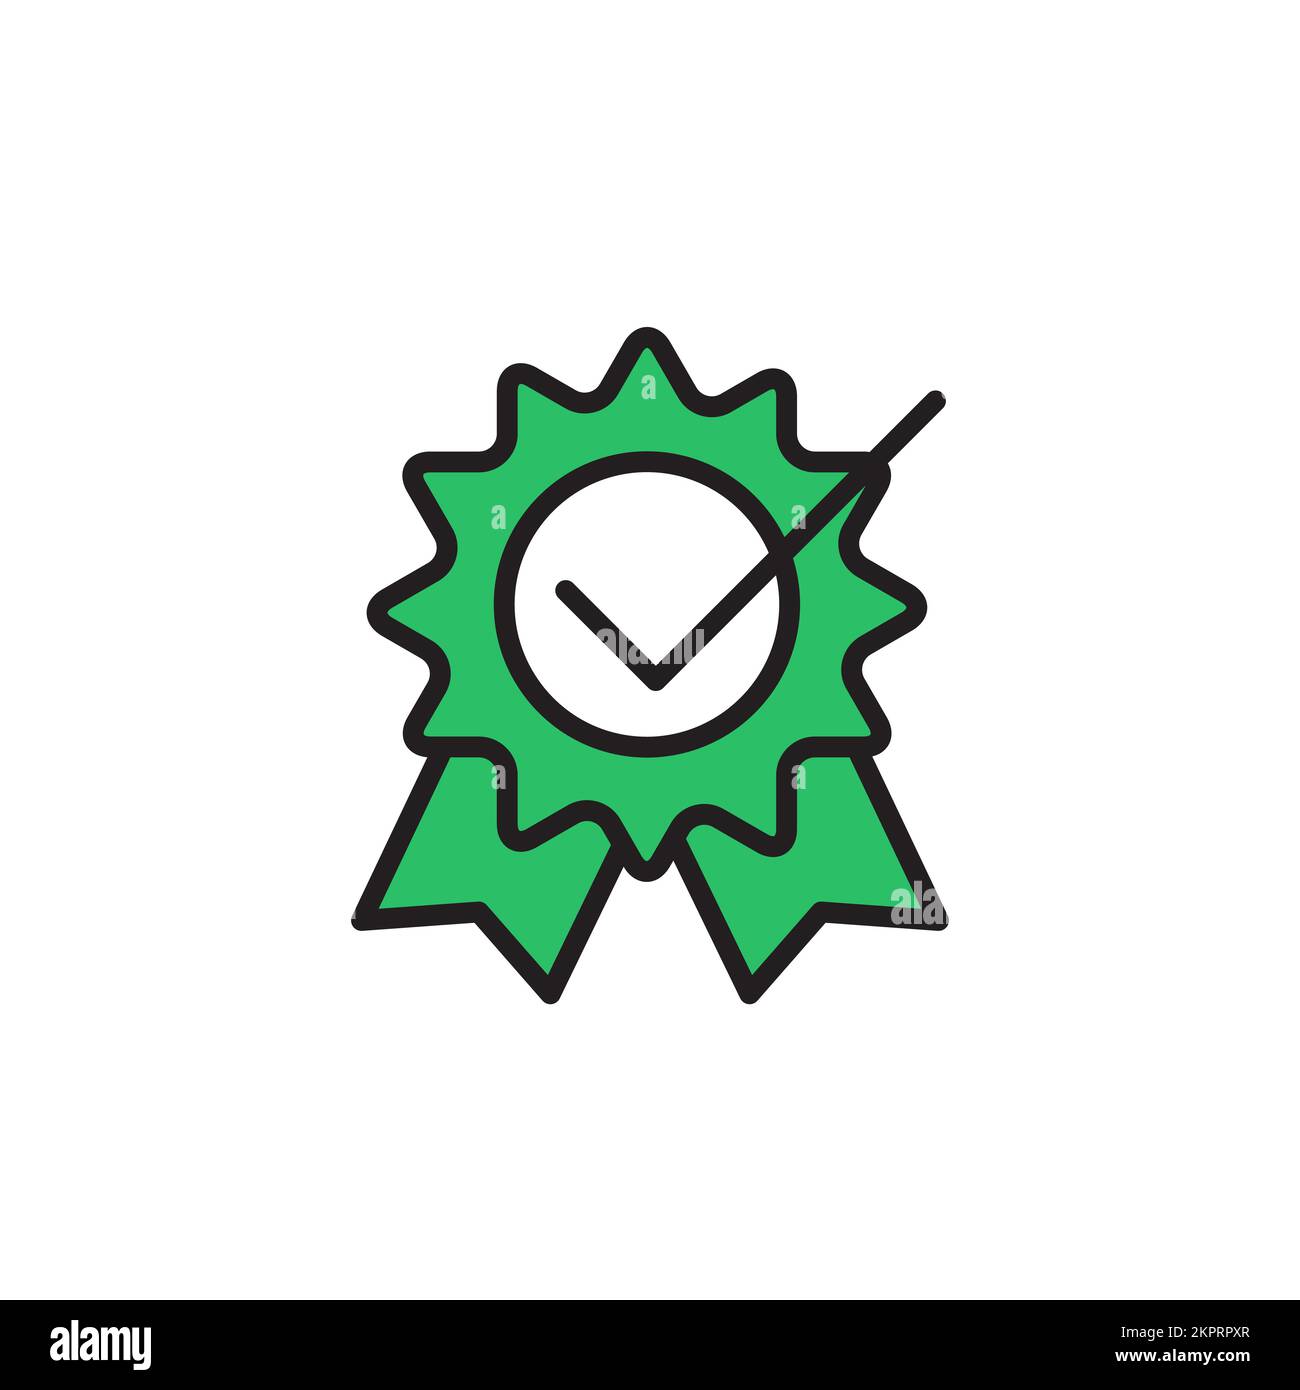 Approved icon on white background Stock Vector